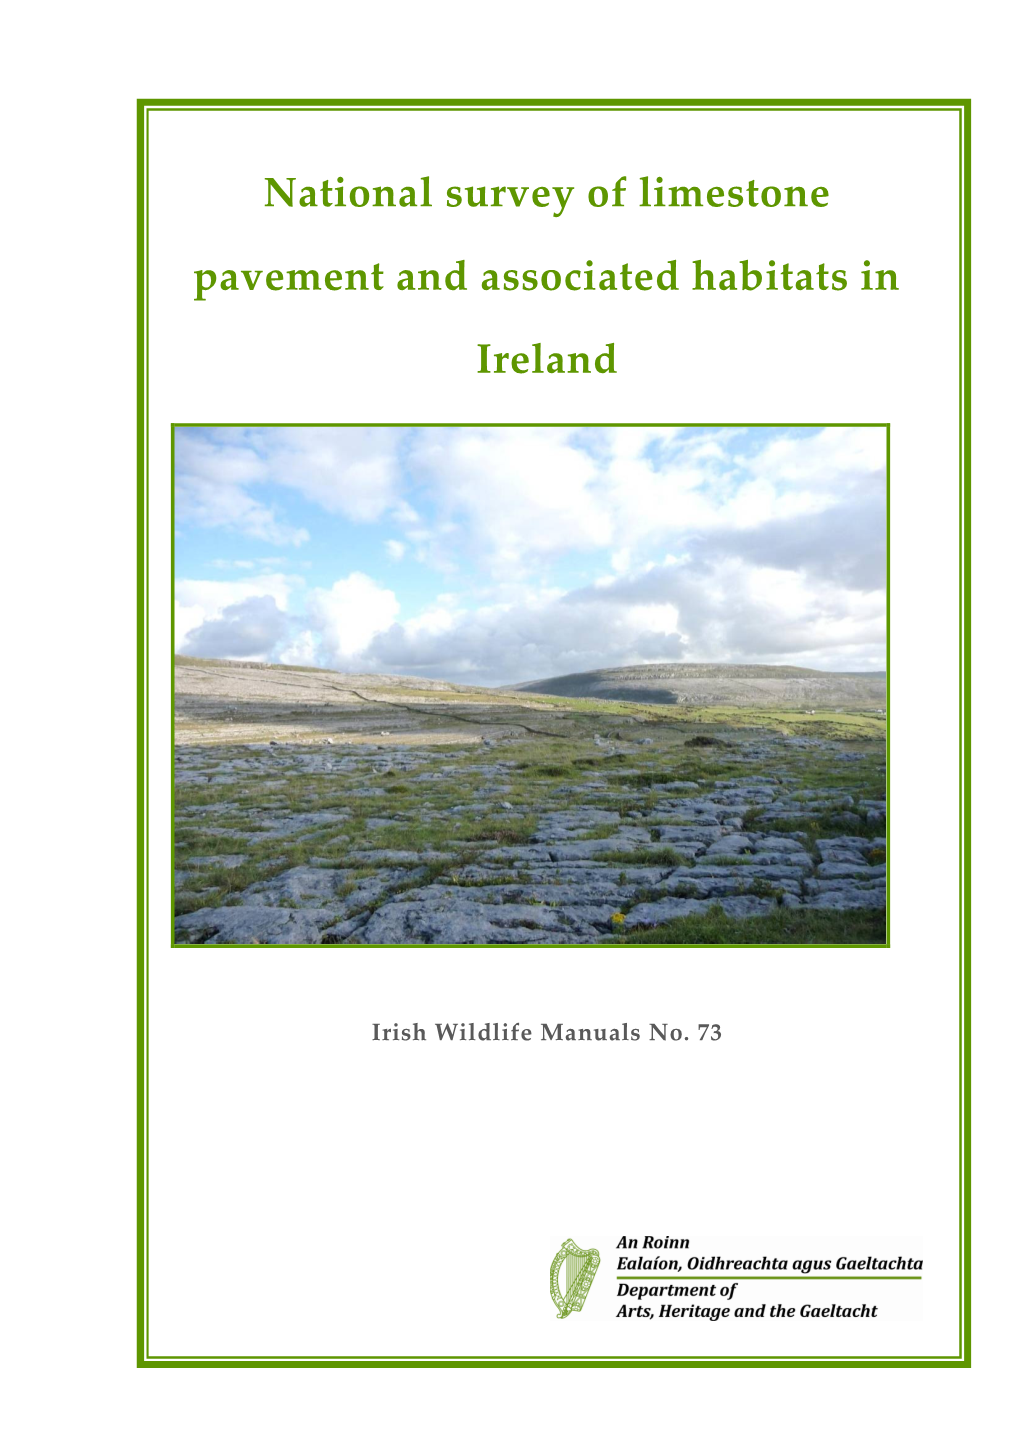 National Survey of Limestone Pavement and Associated Habitats In